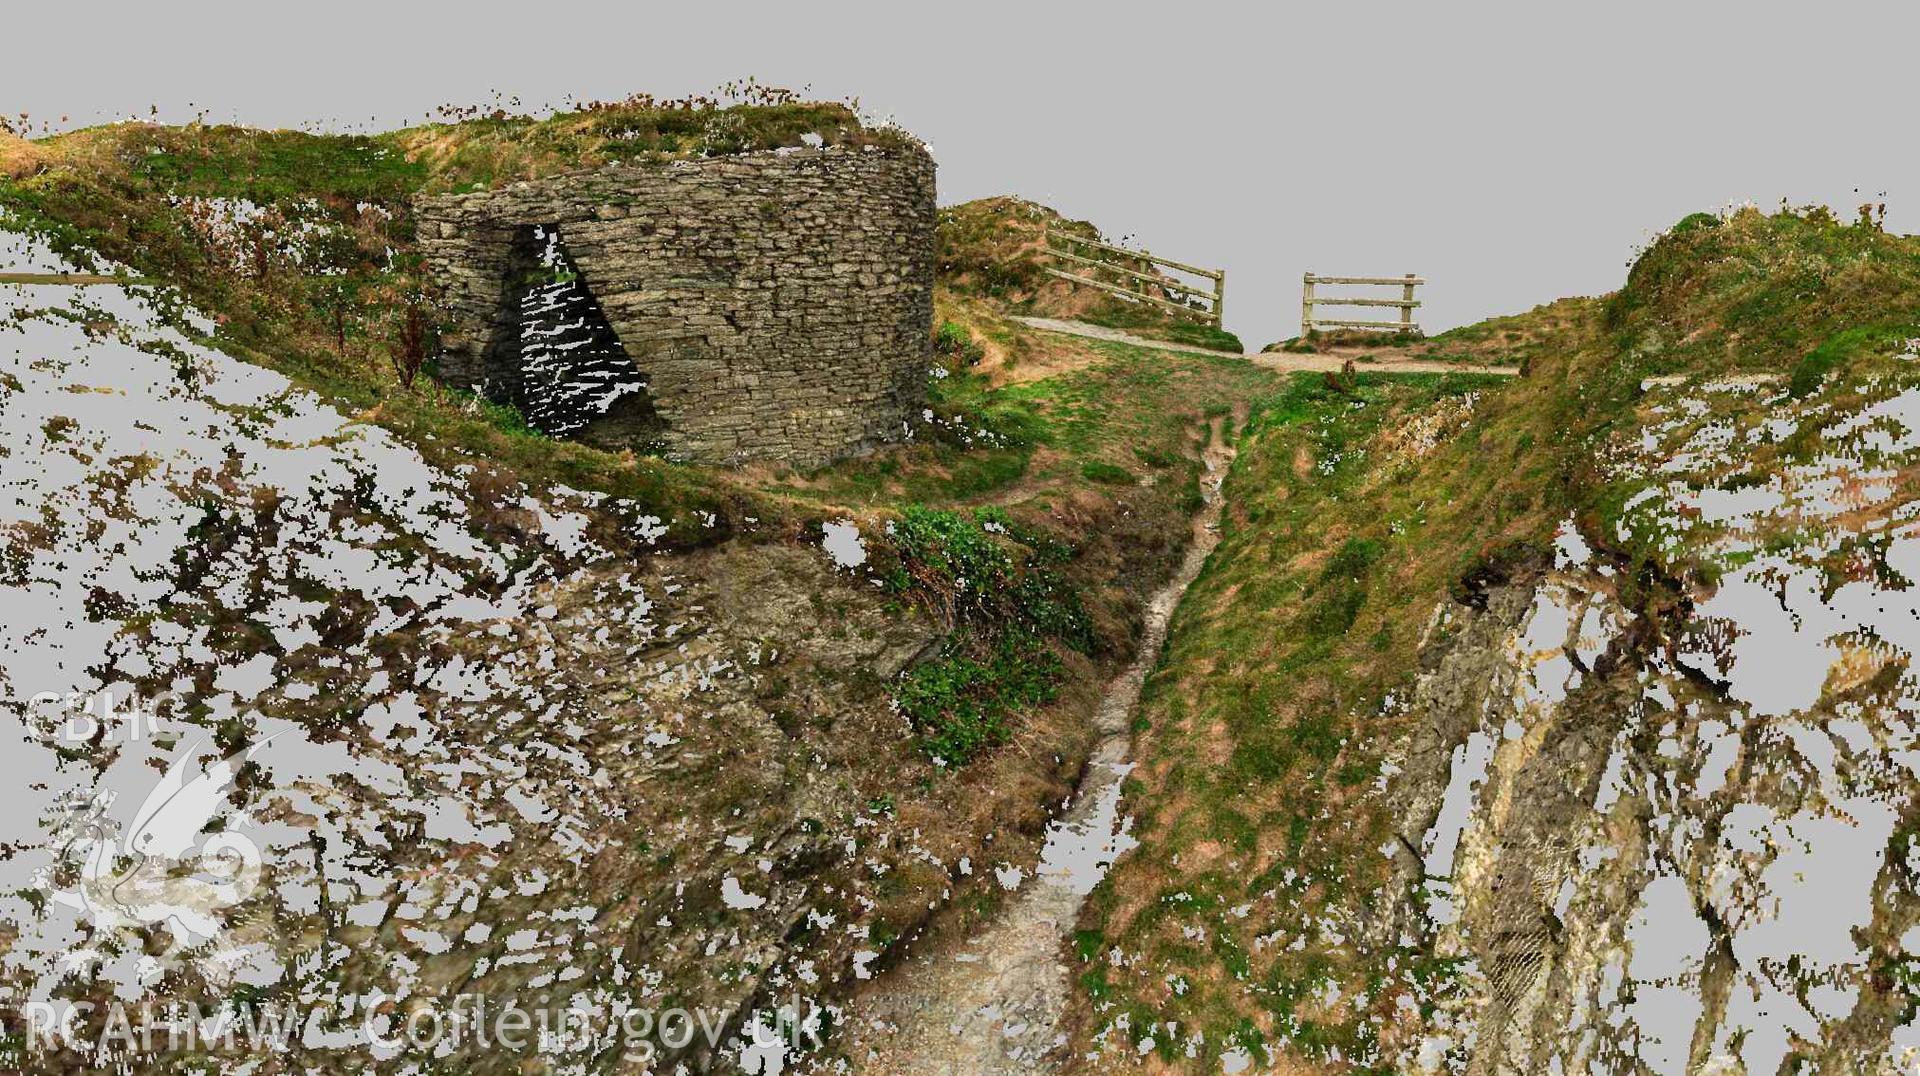 View of point cloud looking north, showing the proximity of the lime kiln to the Wales Coast Path (running left to right in the background) and the unmade footpath leading in front of the kiln (leading away from the viewpoint). Part of a Terrestrial Laser Scanning Survey archive for Craig-y-Gwbert limekiln, carried out by Dr Jayne Kamintzis of RCAHMW on 20 September 2022.